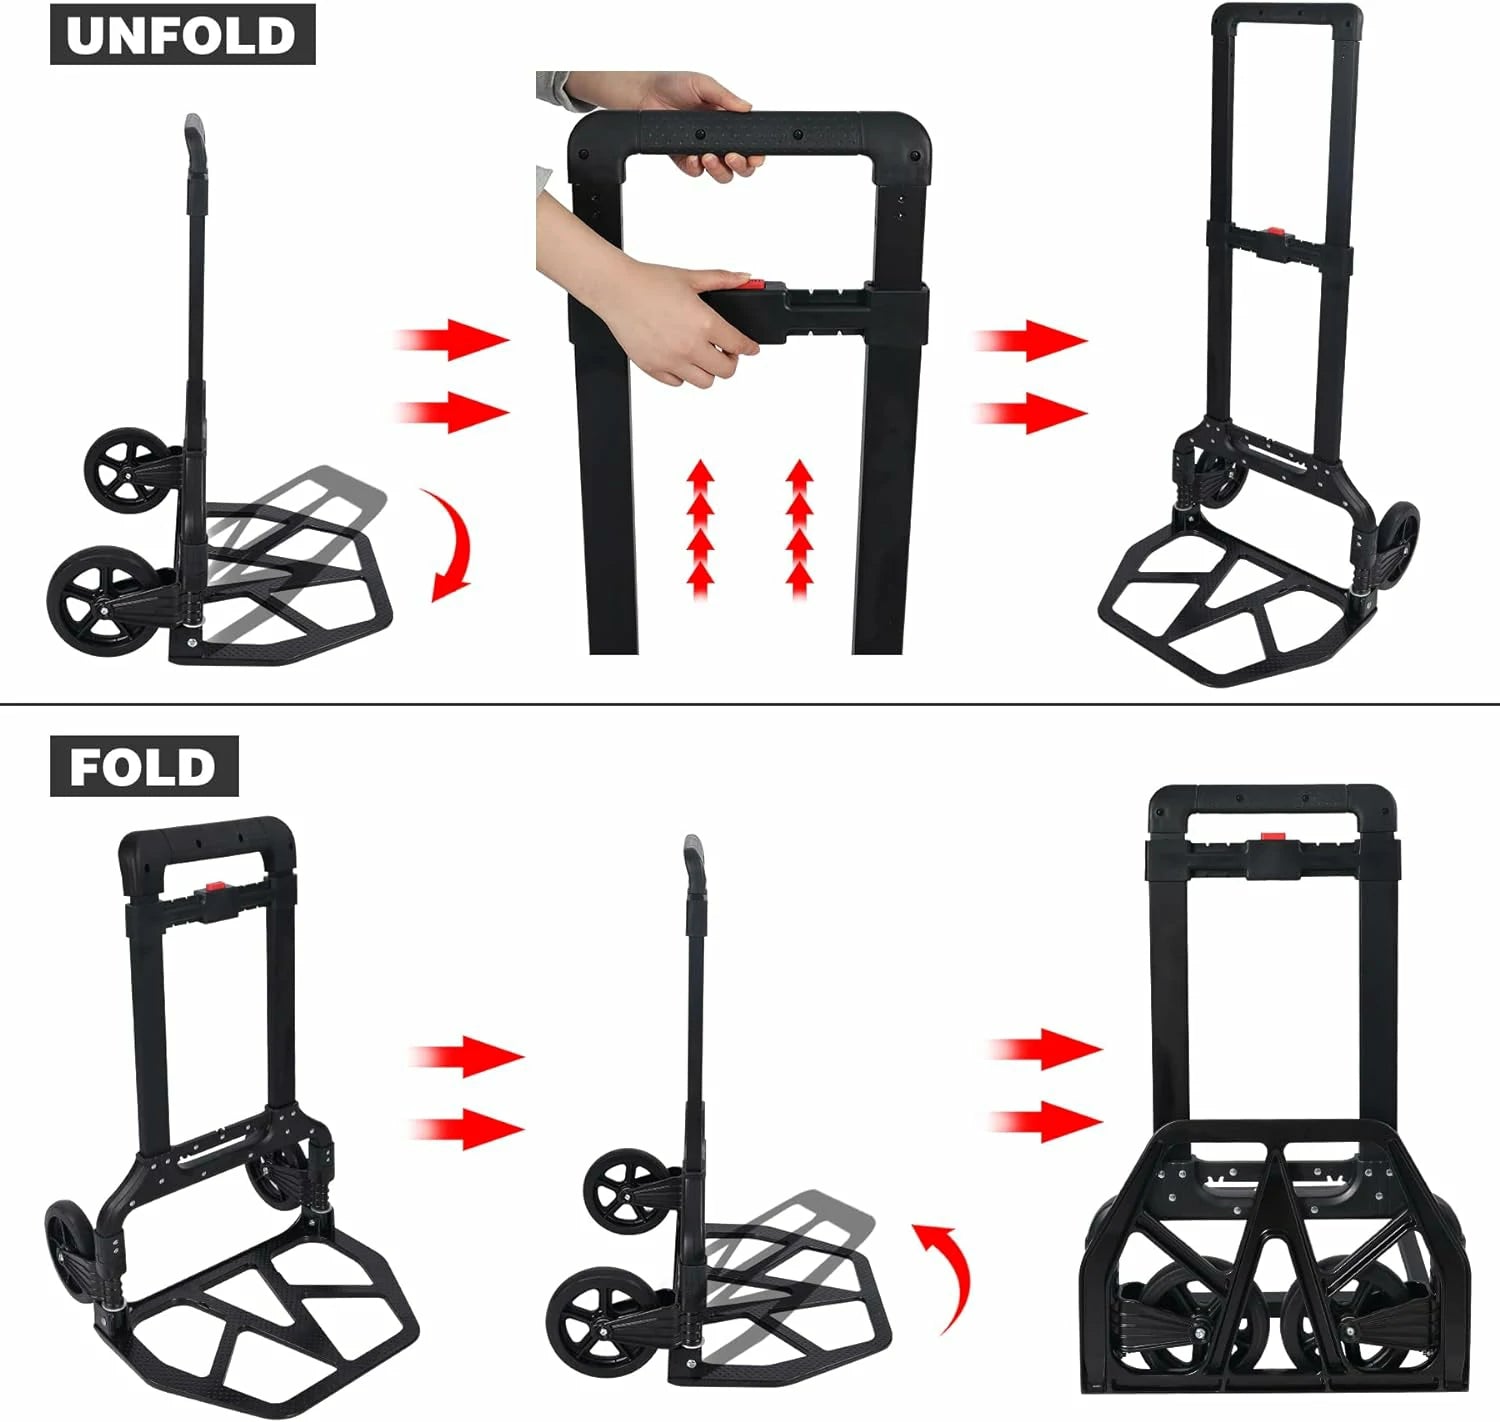 REDCAMP Hand Truck Dolly Foldable